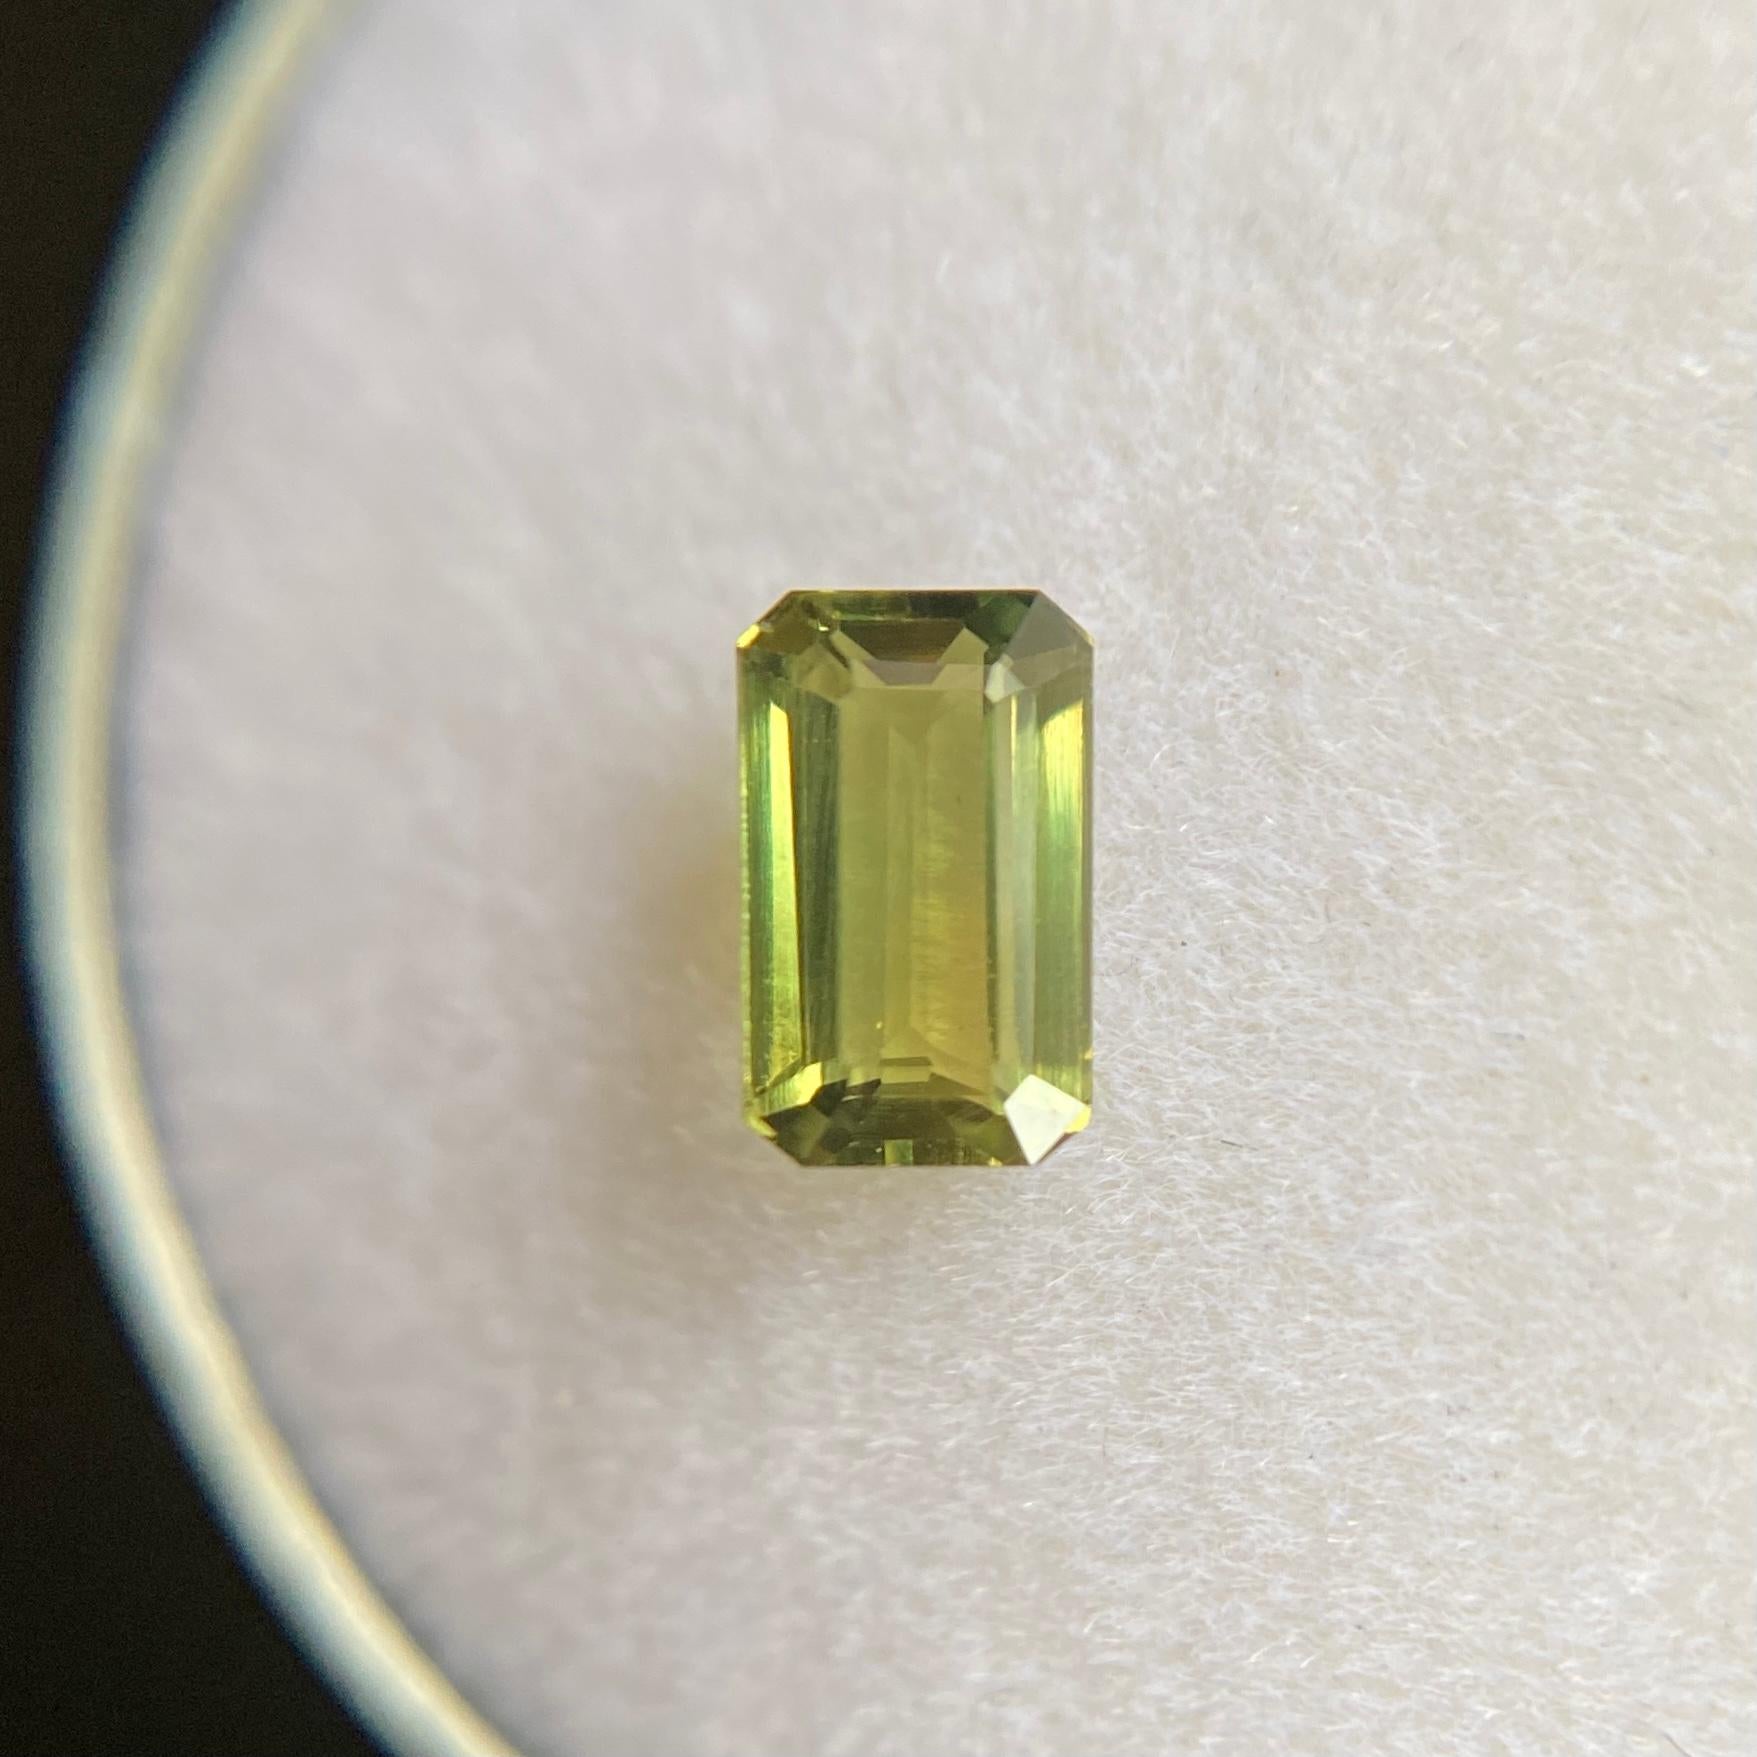 Fine Natural Untreated Australian Green Sapphire Gemstone.

0.84 Carat with a beautiful yellow green colour and an excellent emerald octagon cut. Also has excellent clarity, a very clean stone.

Totally untreated and unheated, very rare for natural